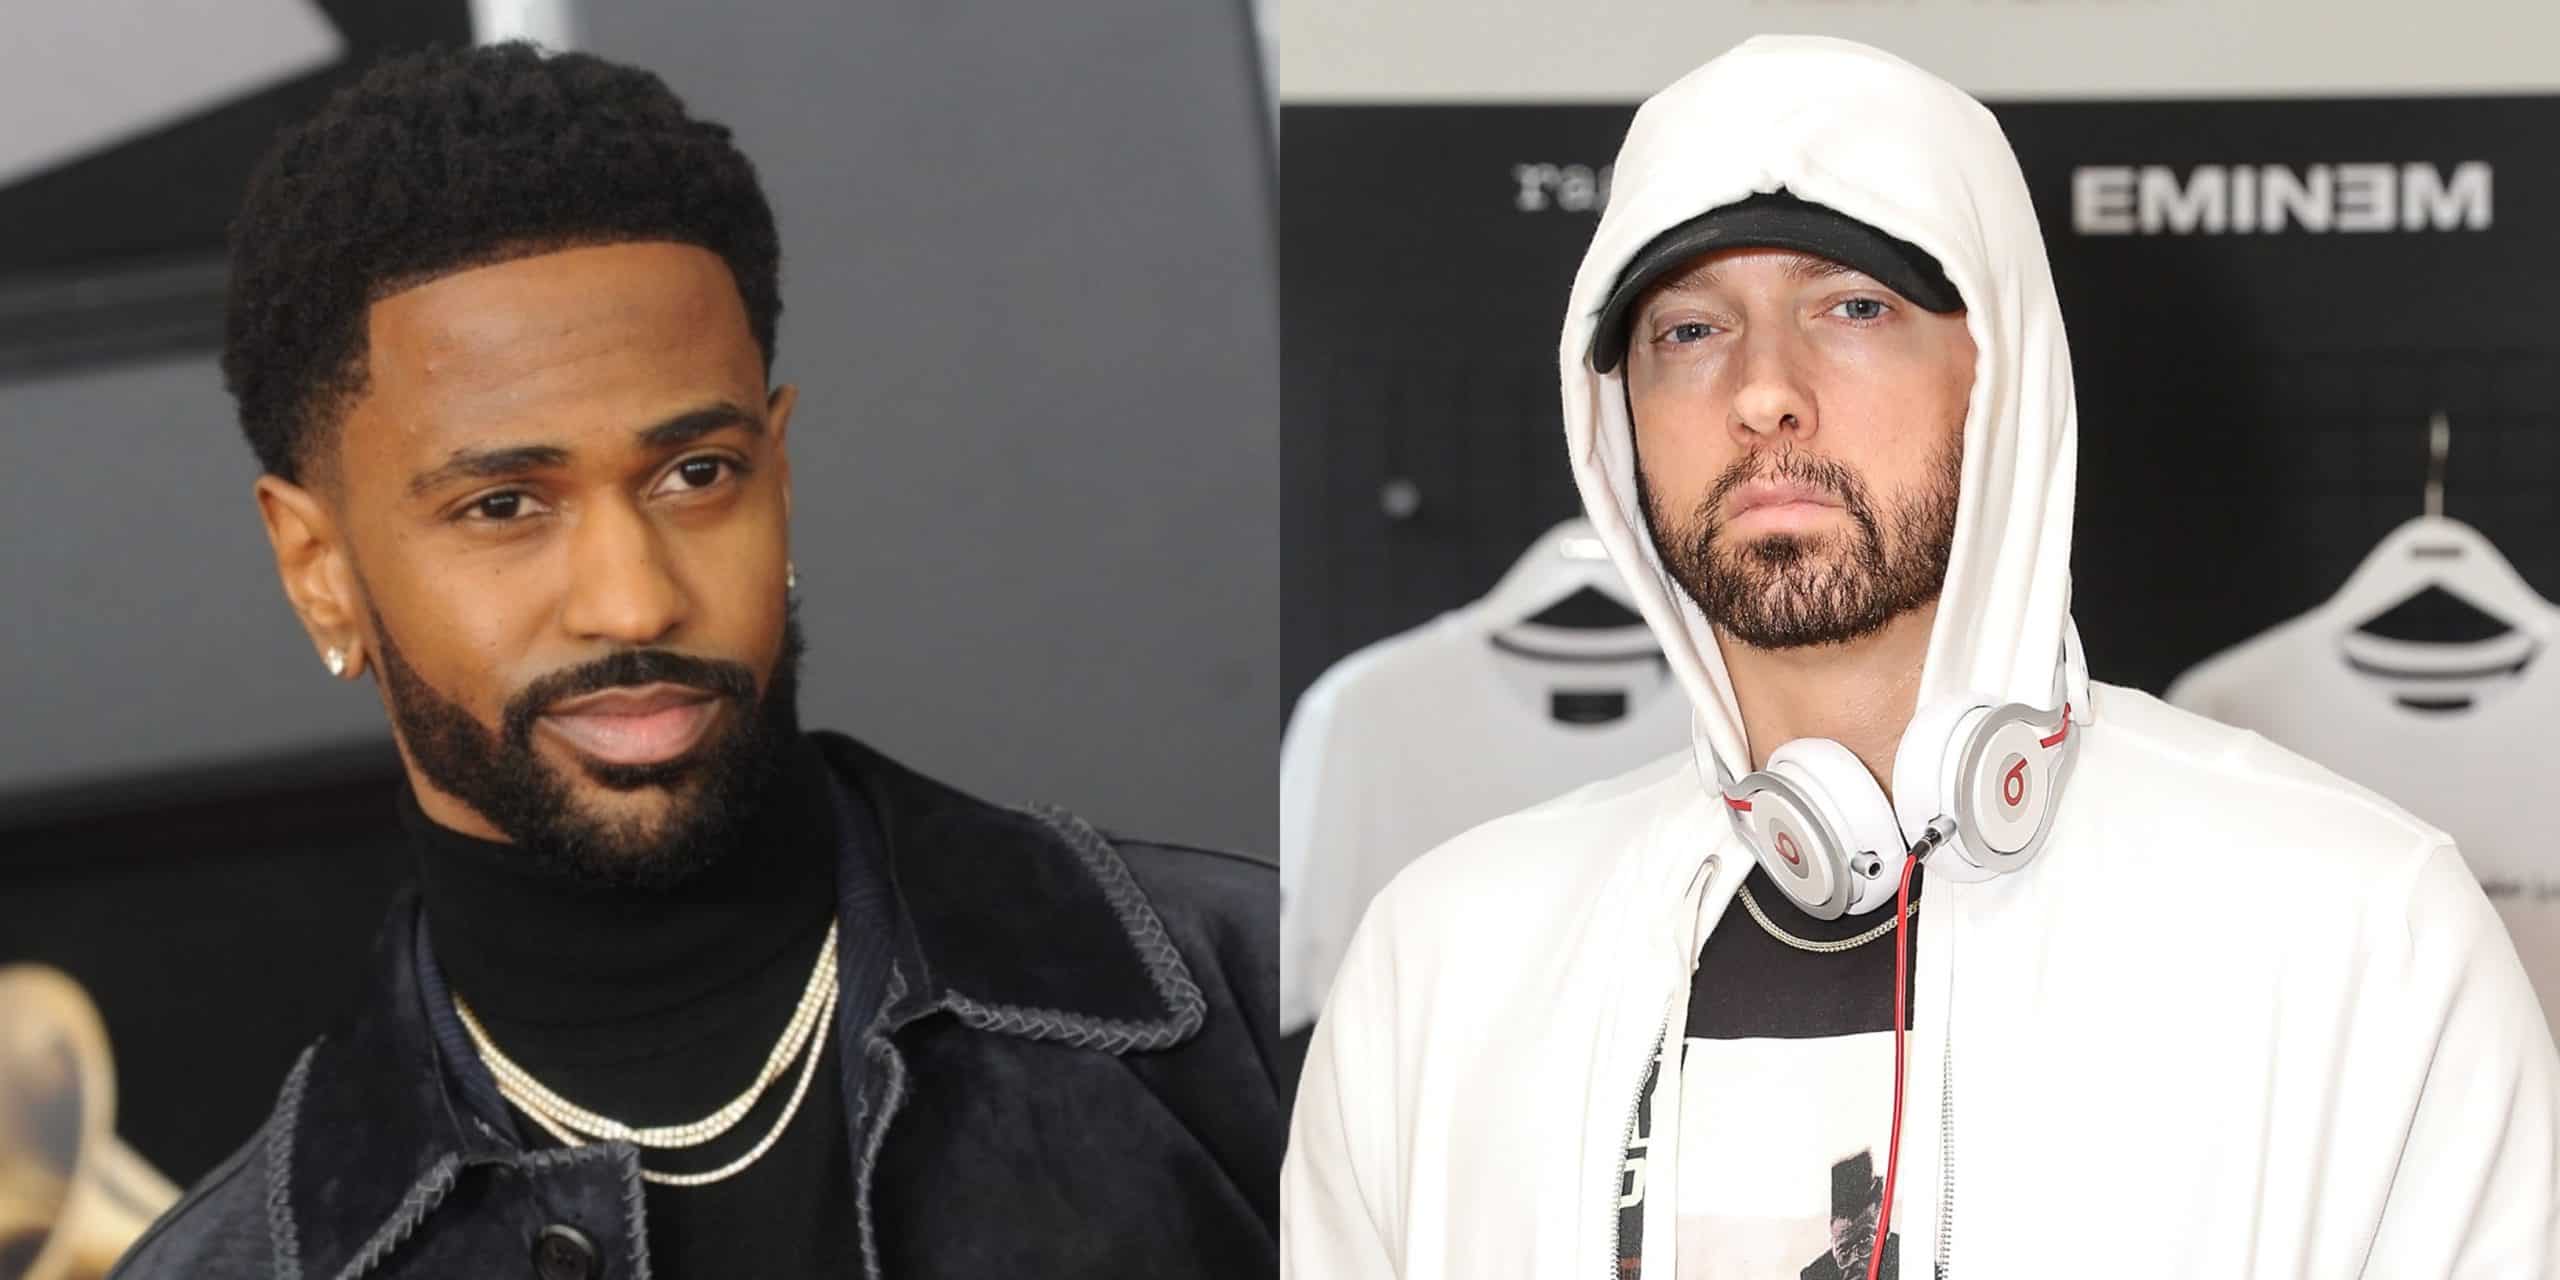 Eminem's New “Friday Night Cypher” With Big Sean, Royce Da 5'9 & More Dropping This Friday